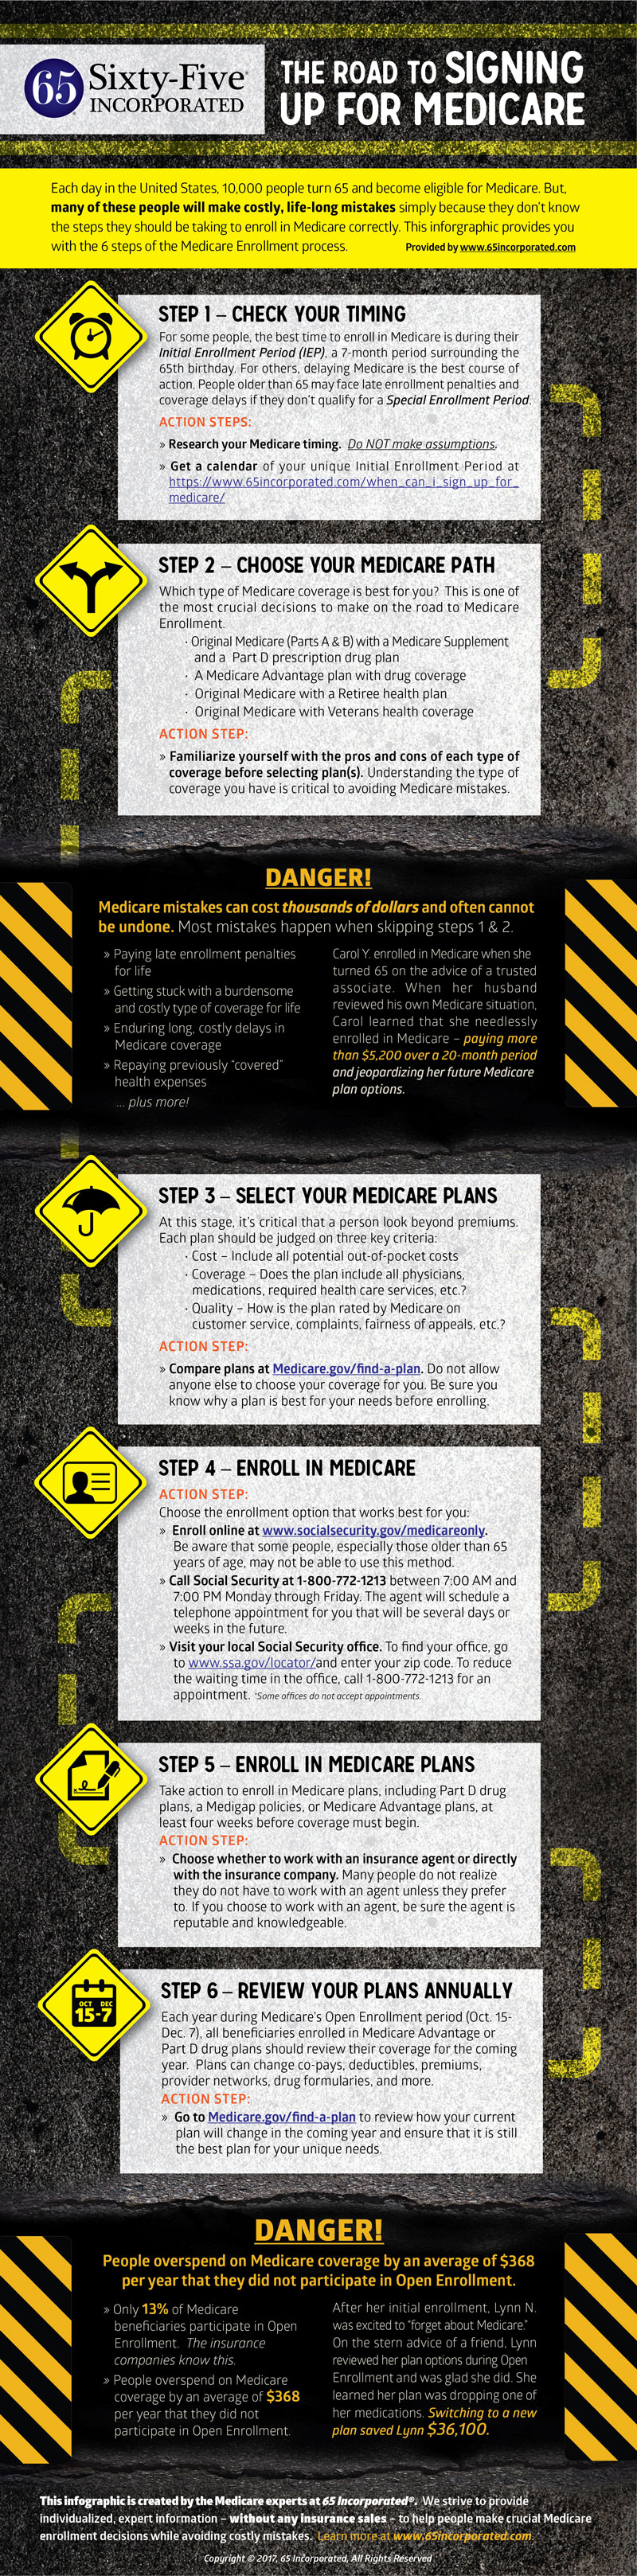 Medicare Infographic - The Six Steps to Signing Up for Medicare